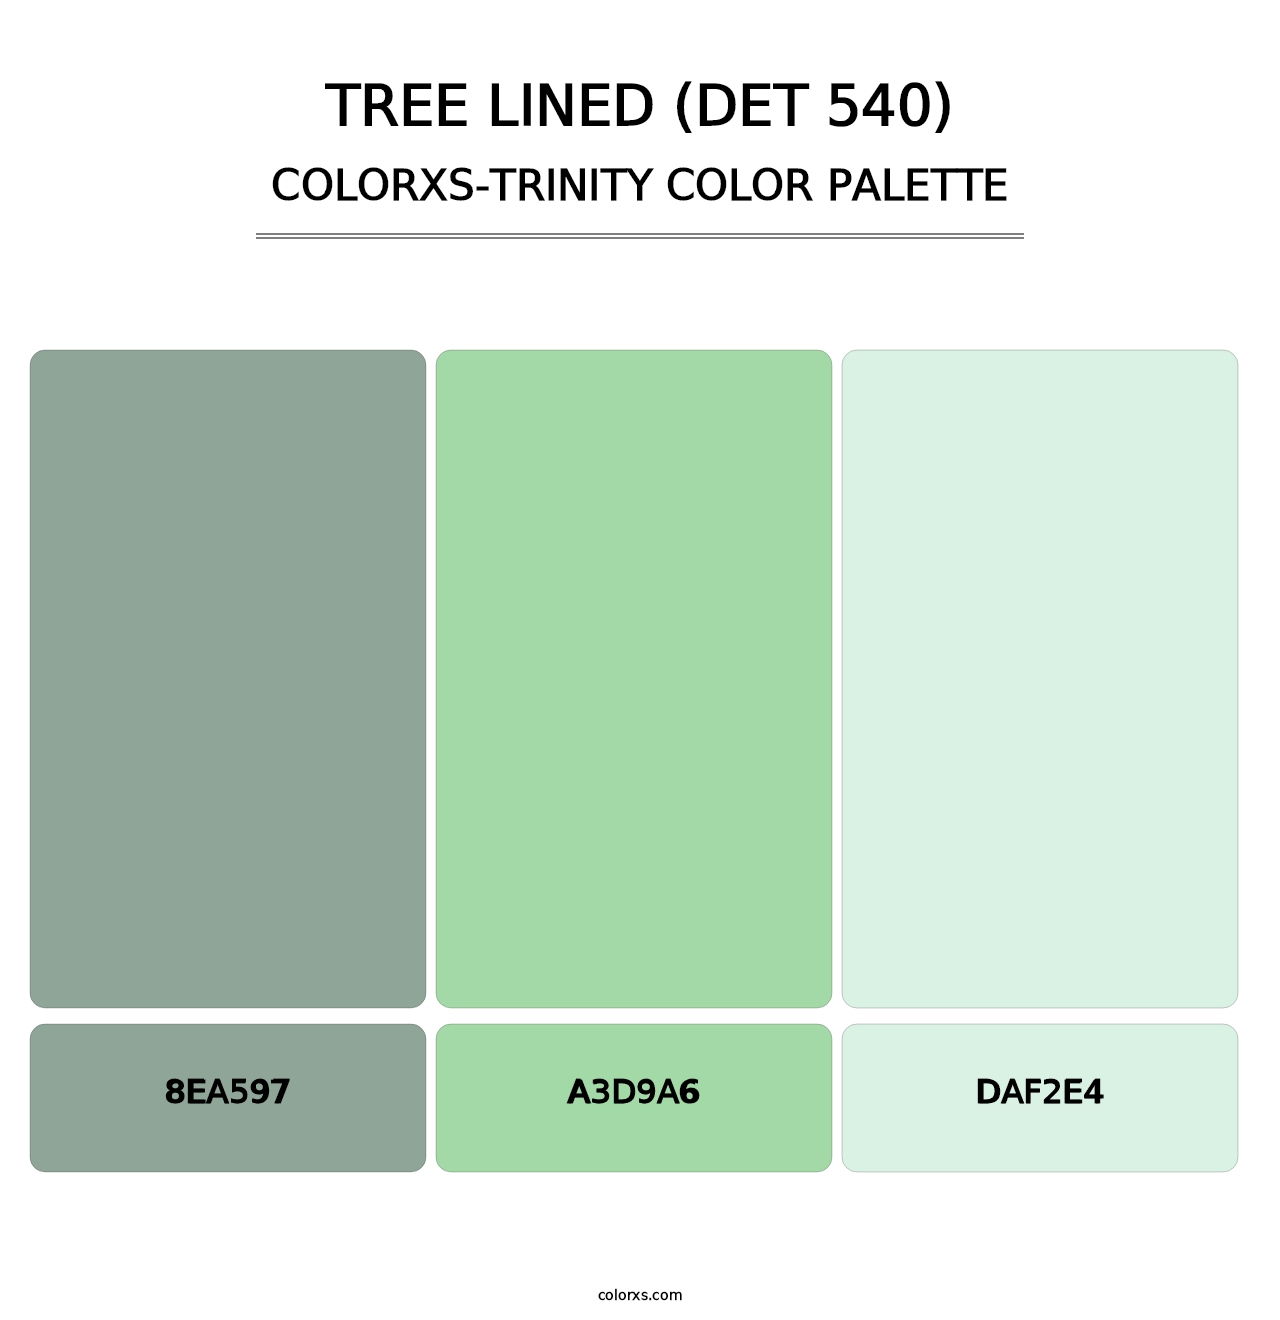 Tree Lined (DET 540) - Colorxs Trinity Palette